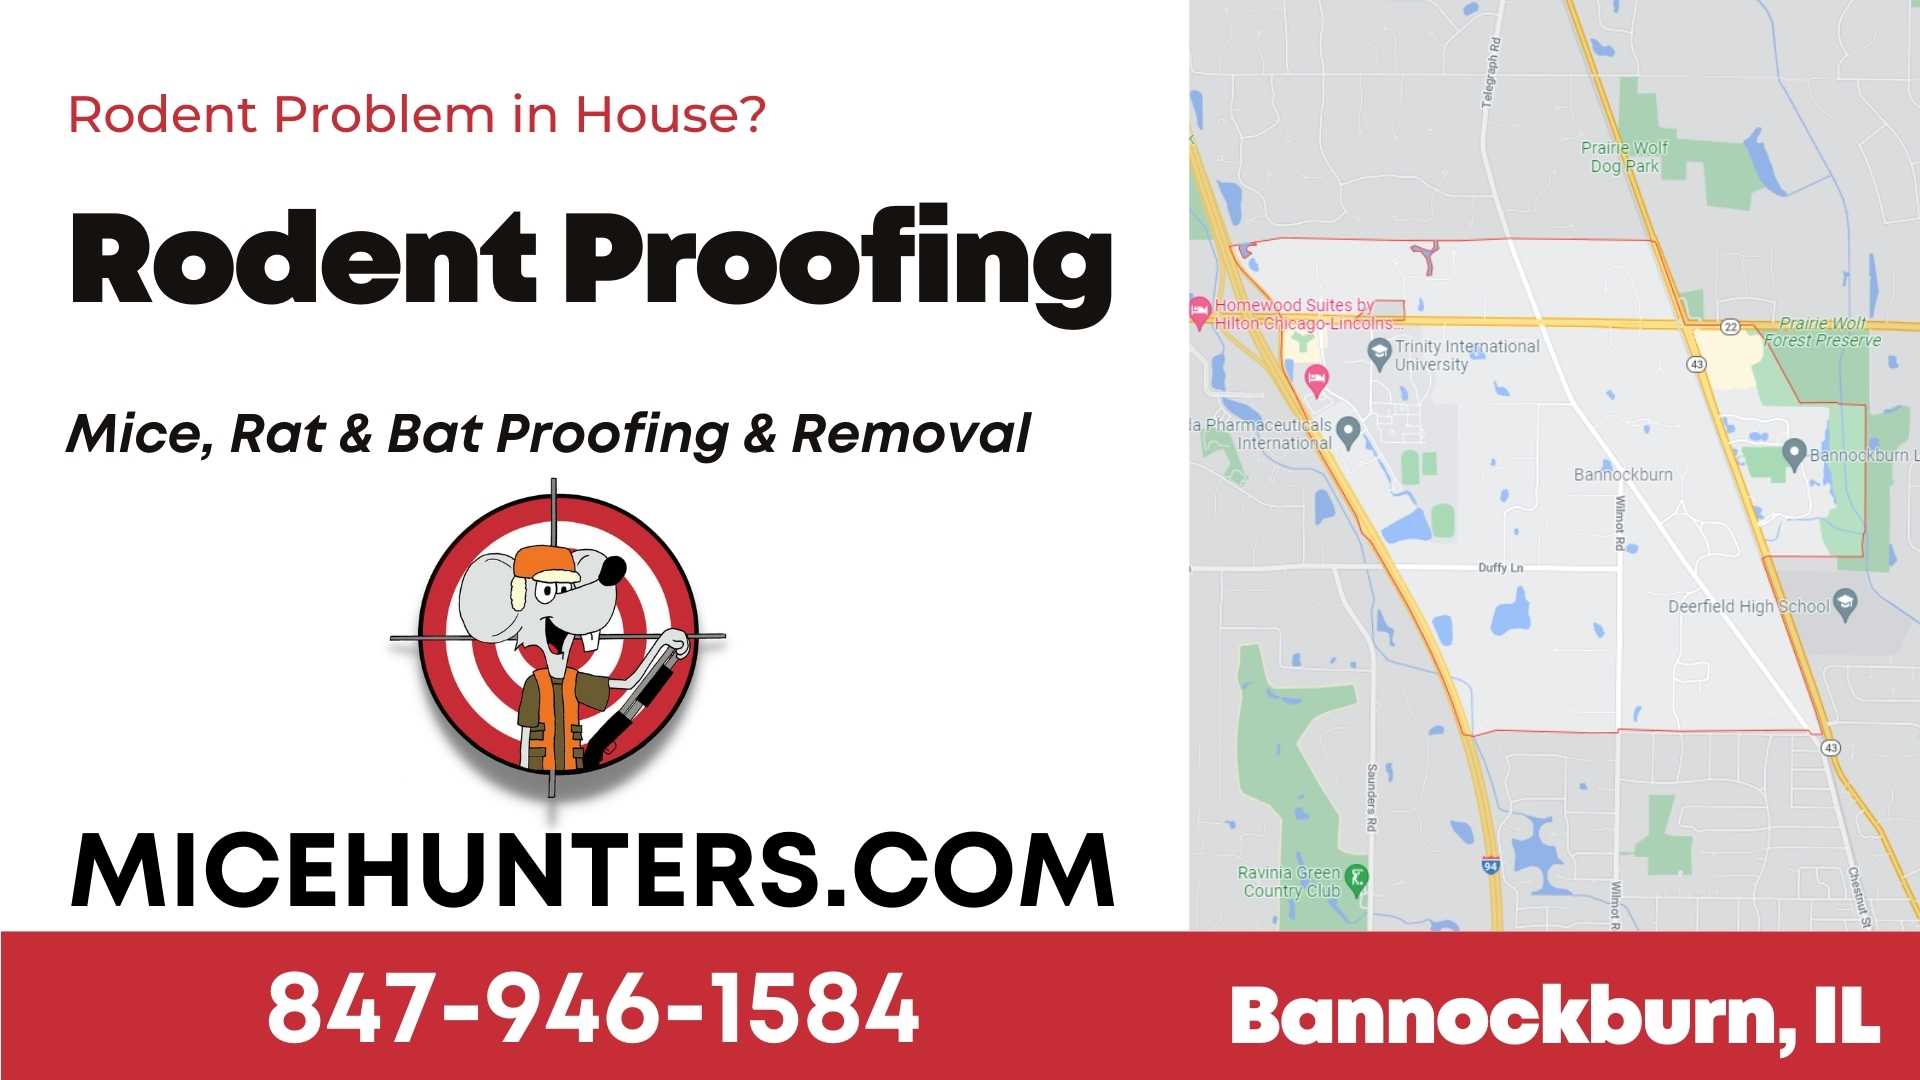 Bannockburn Rodent and Mice Proofing Exterminator near me